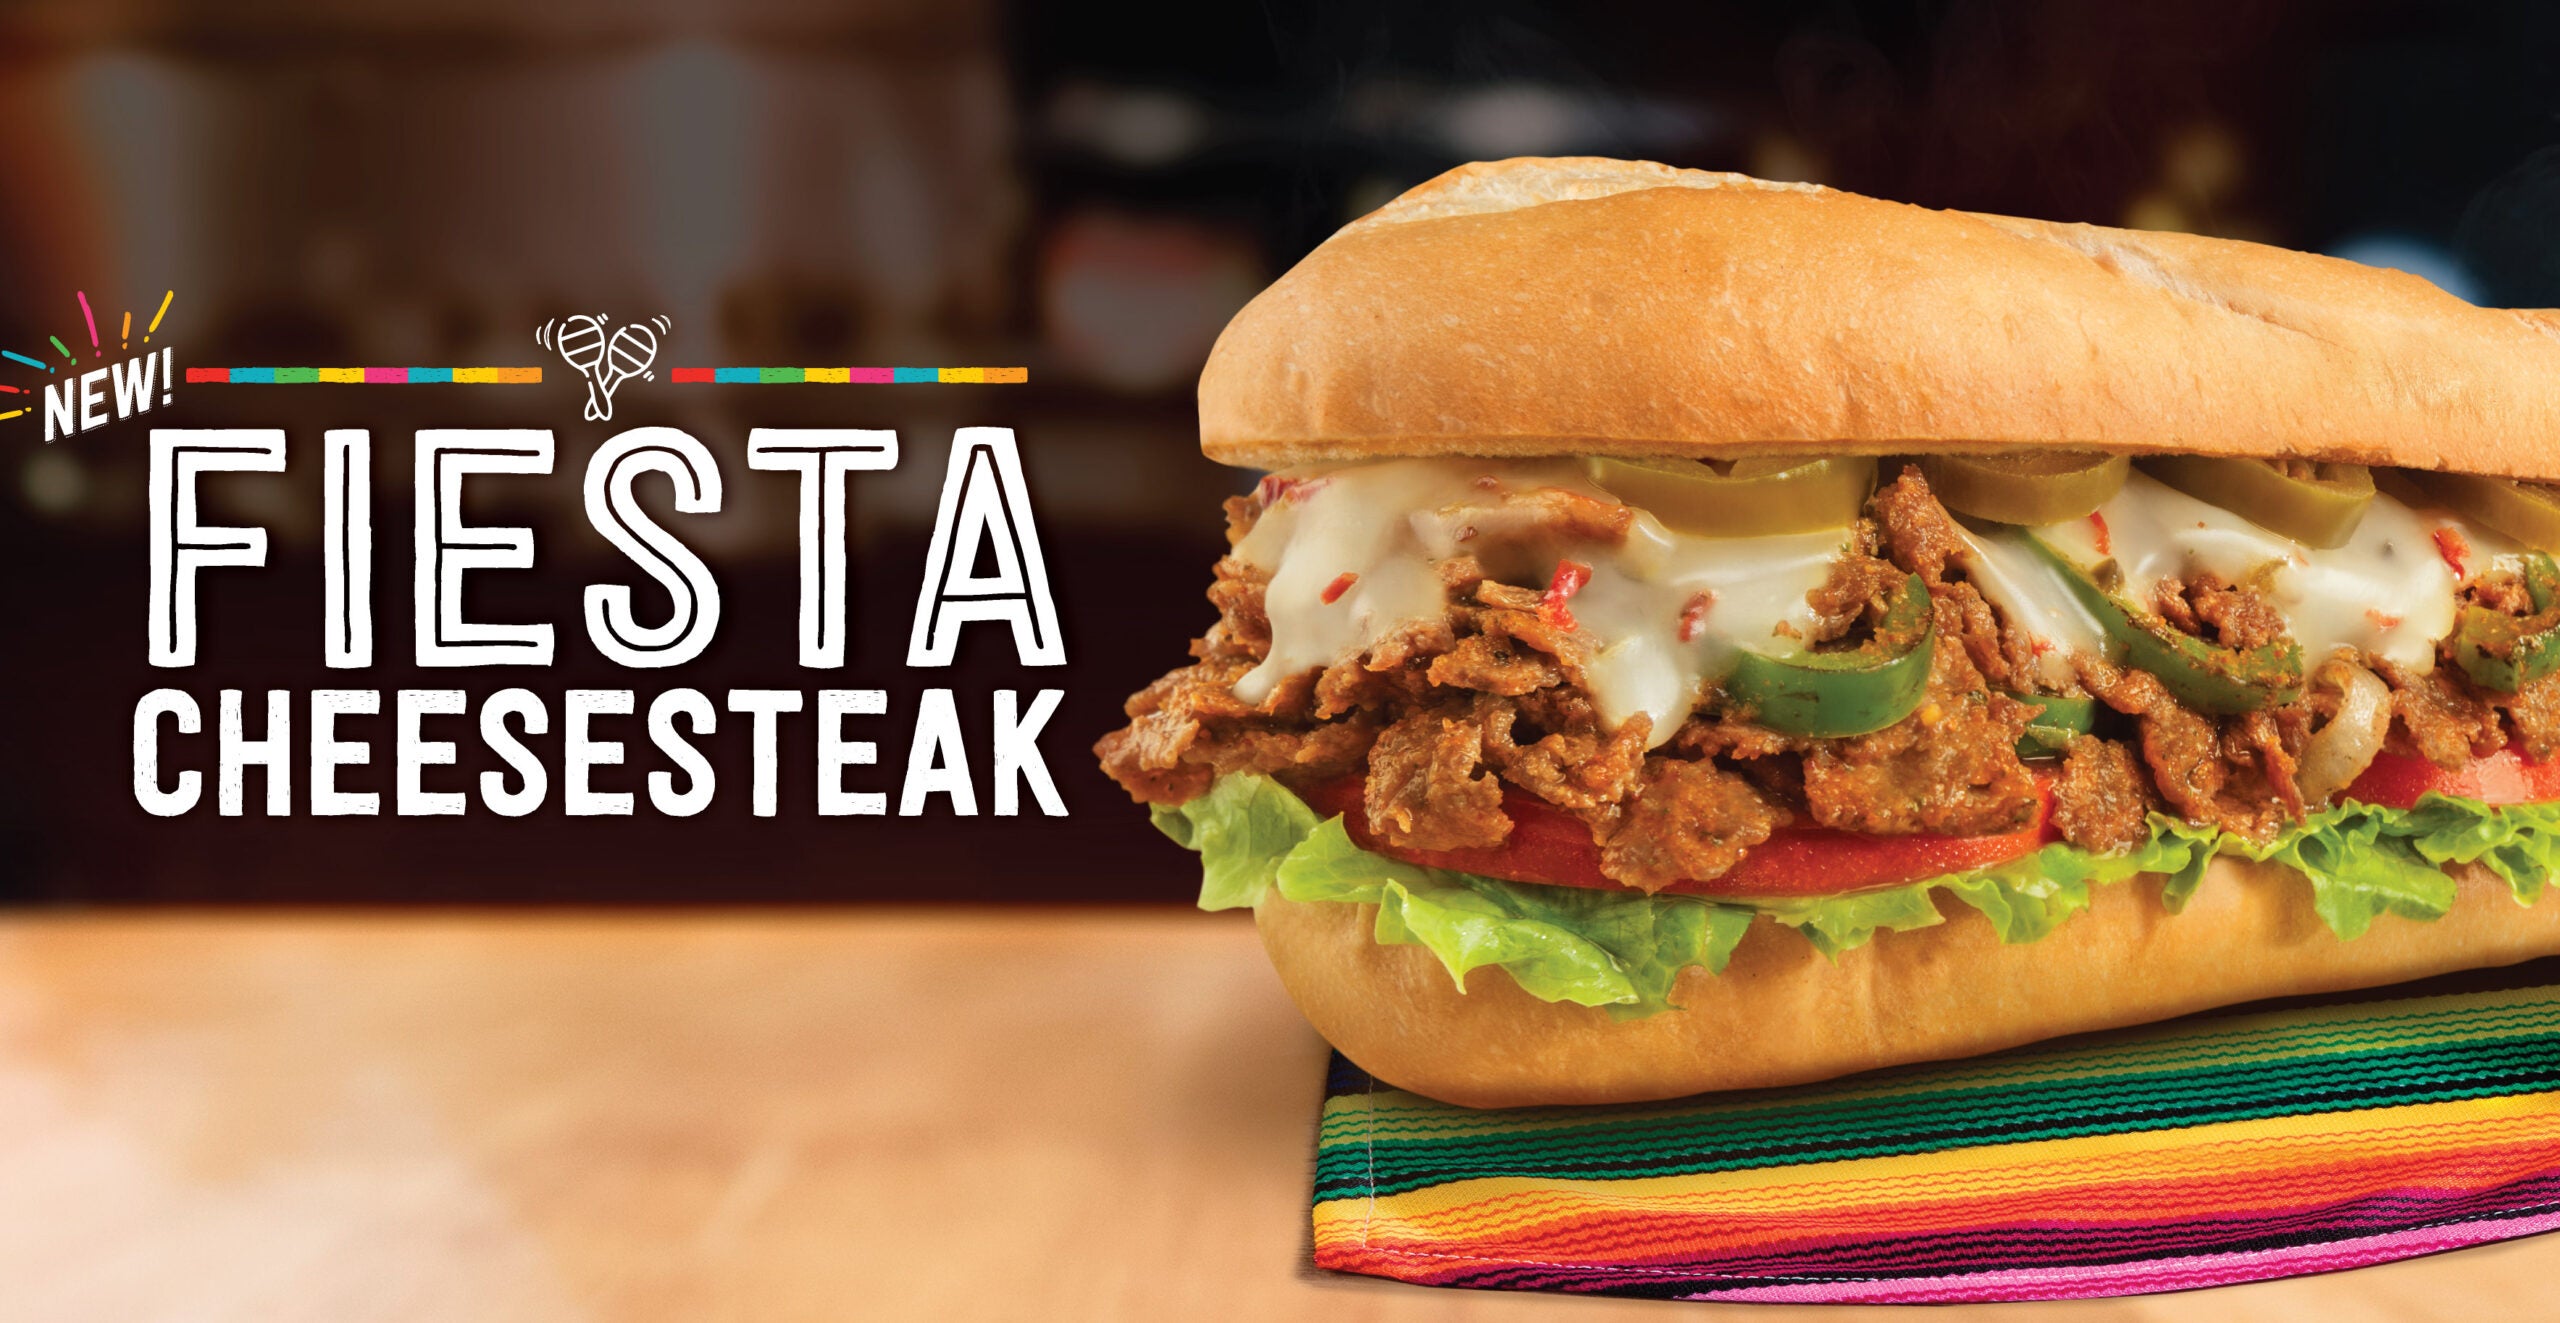 The Fiesta Cheesesteak from Charleys Cheesesteaks on a colorful placement, with white text reading "Fiesta Cheesesteak".